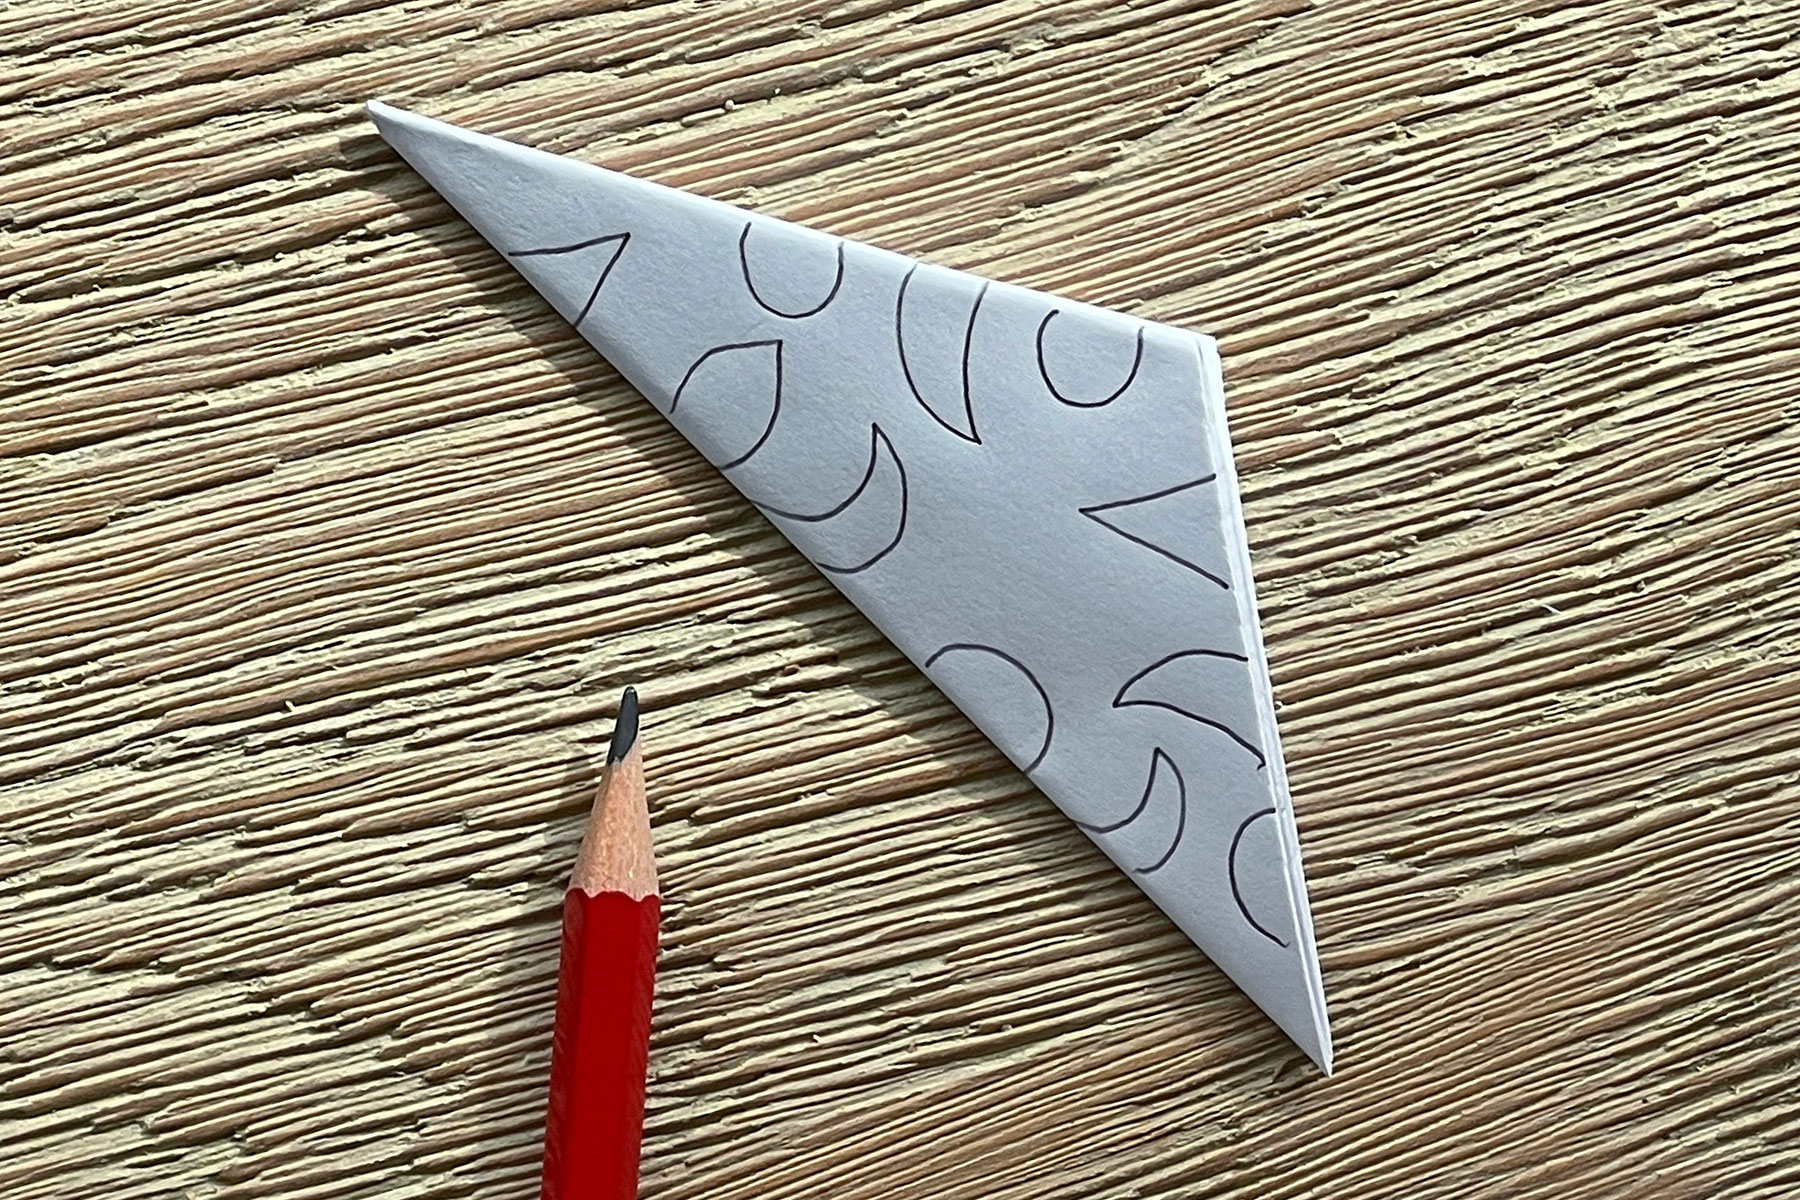 A photo of the triangle piece of paper with shapes drawn on it with a pencil